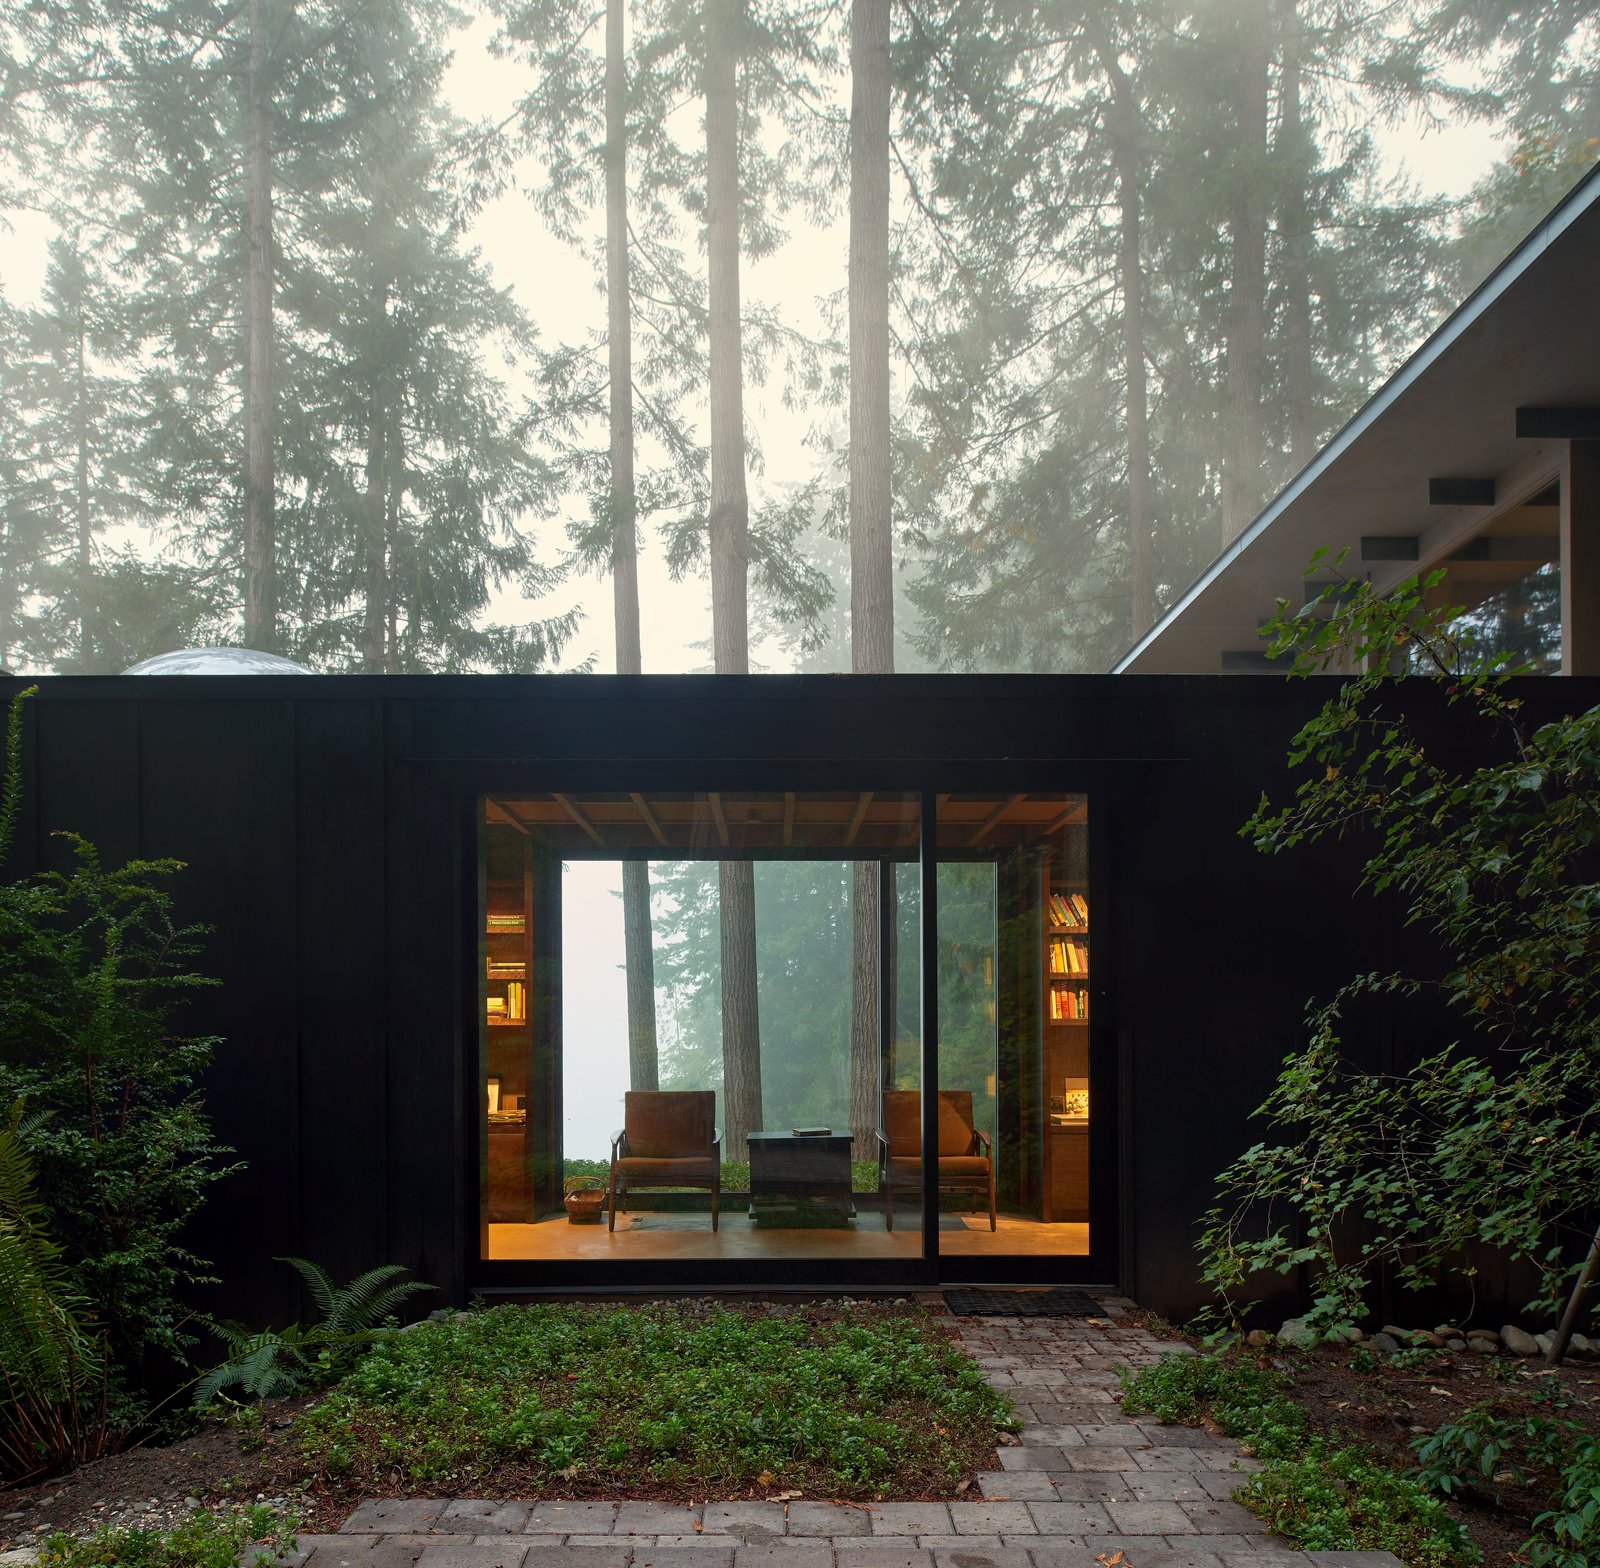 the-cabin-is-intentionally-subdued-in-color-and-texture-allowing-it-to-recede-into-the-woods-and-defer-to-the-beauty-of-the-landscape.jpg